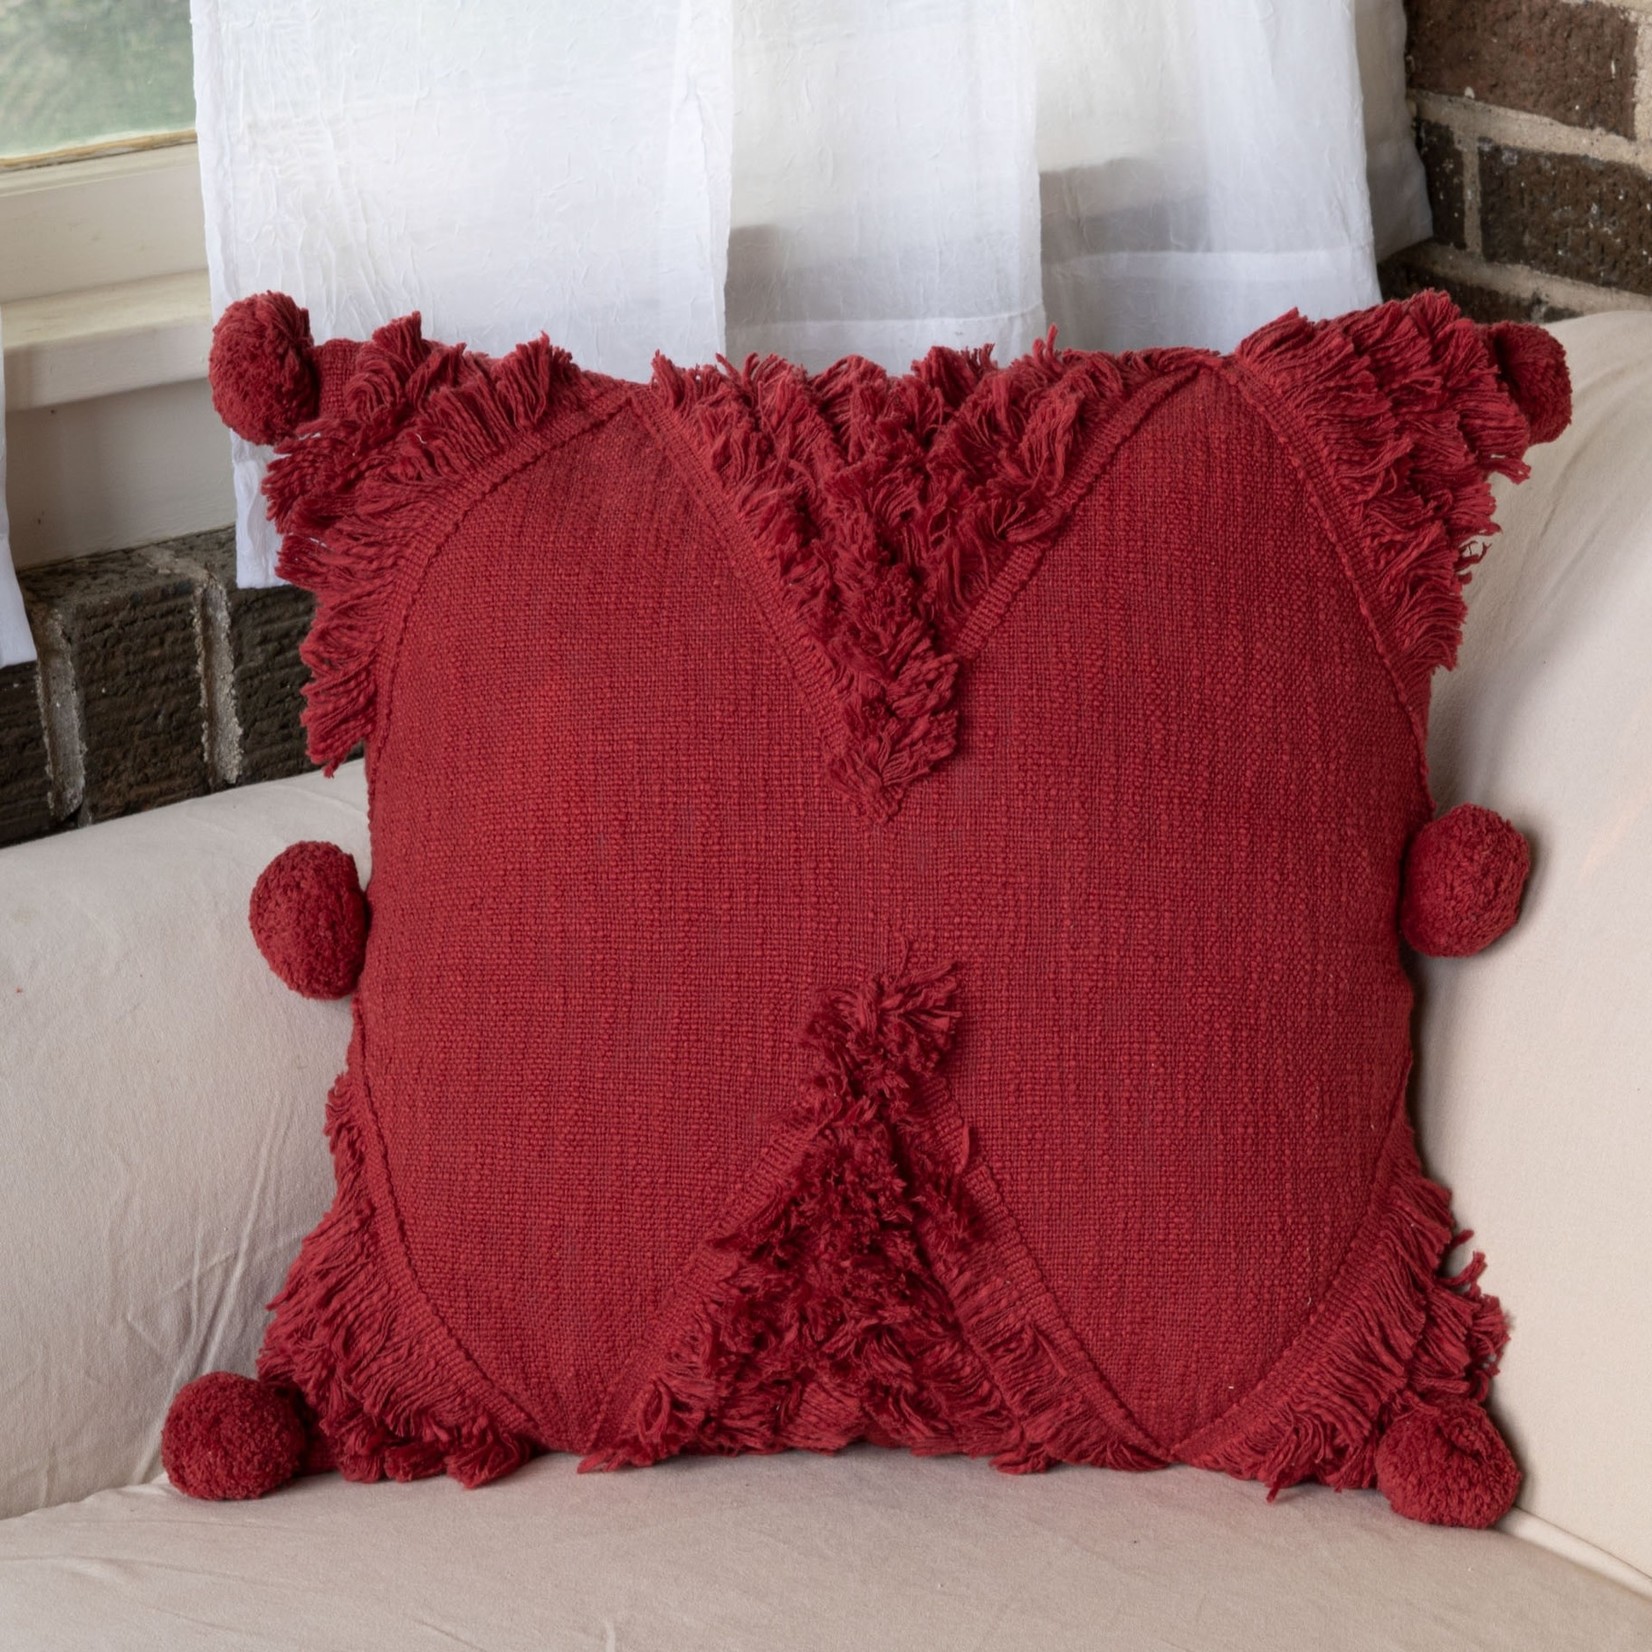 Foreside Home and Garden Hand Woven Betty Pillow in Burgundy